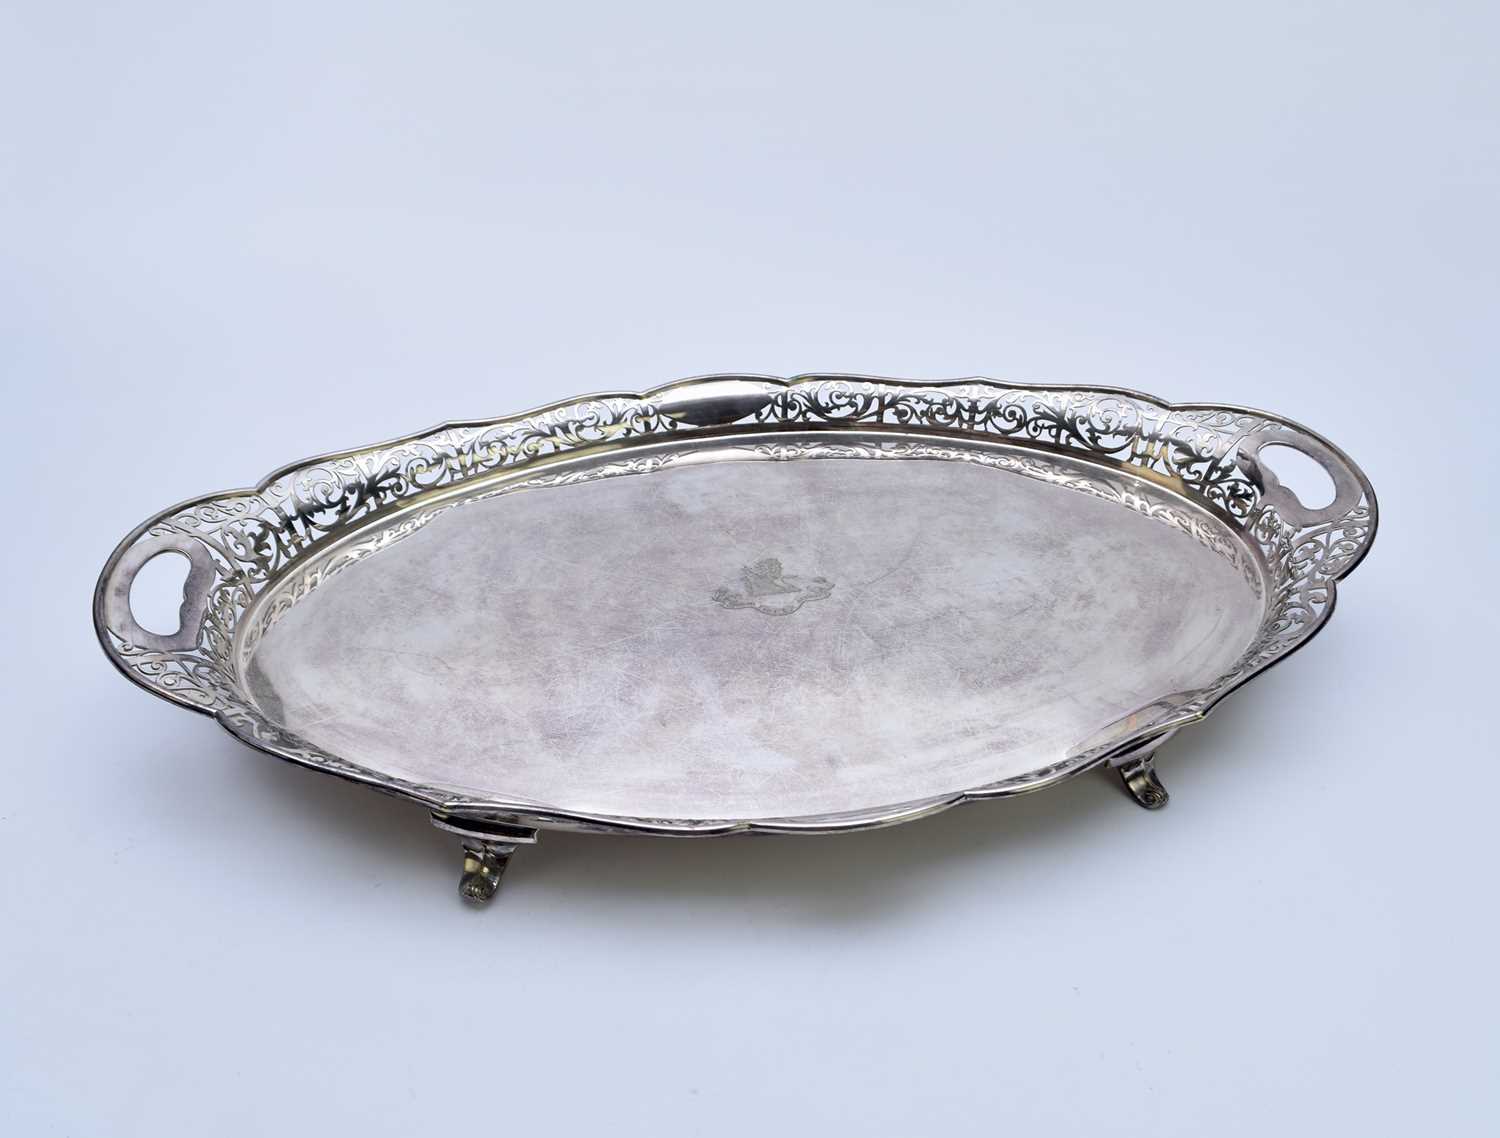 Lot 95 - A large two handled silver plated tray by Mapping & Webb